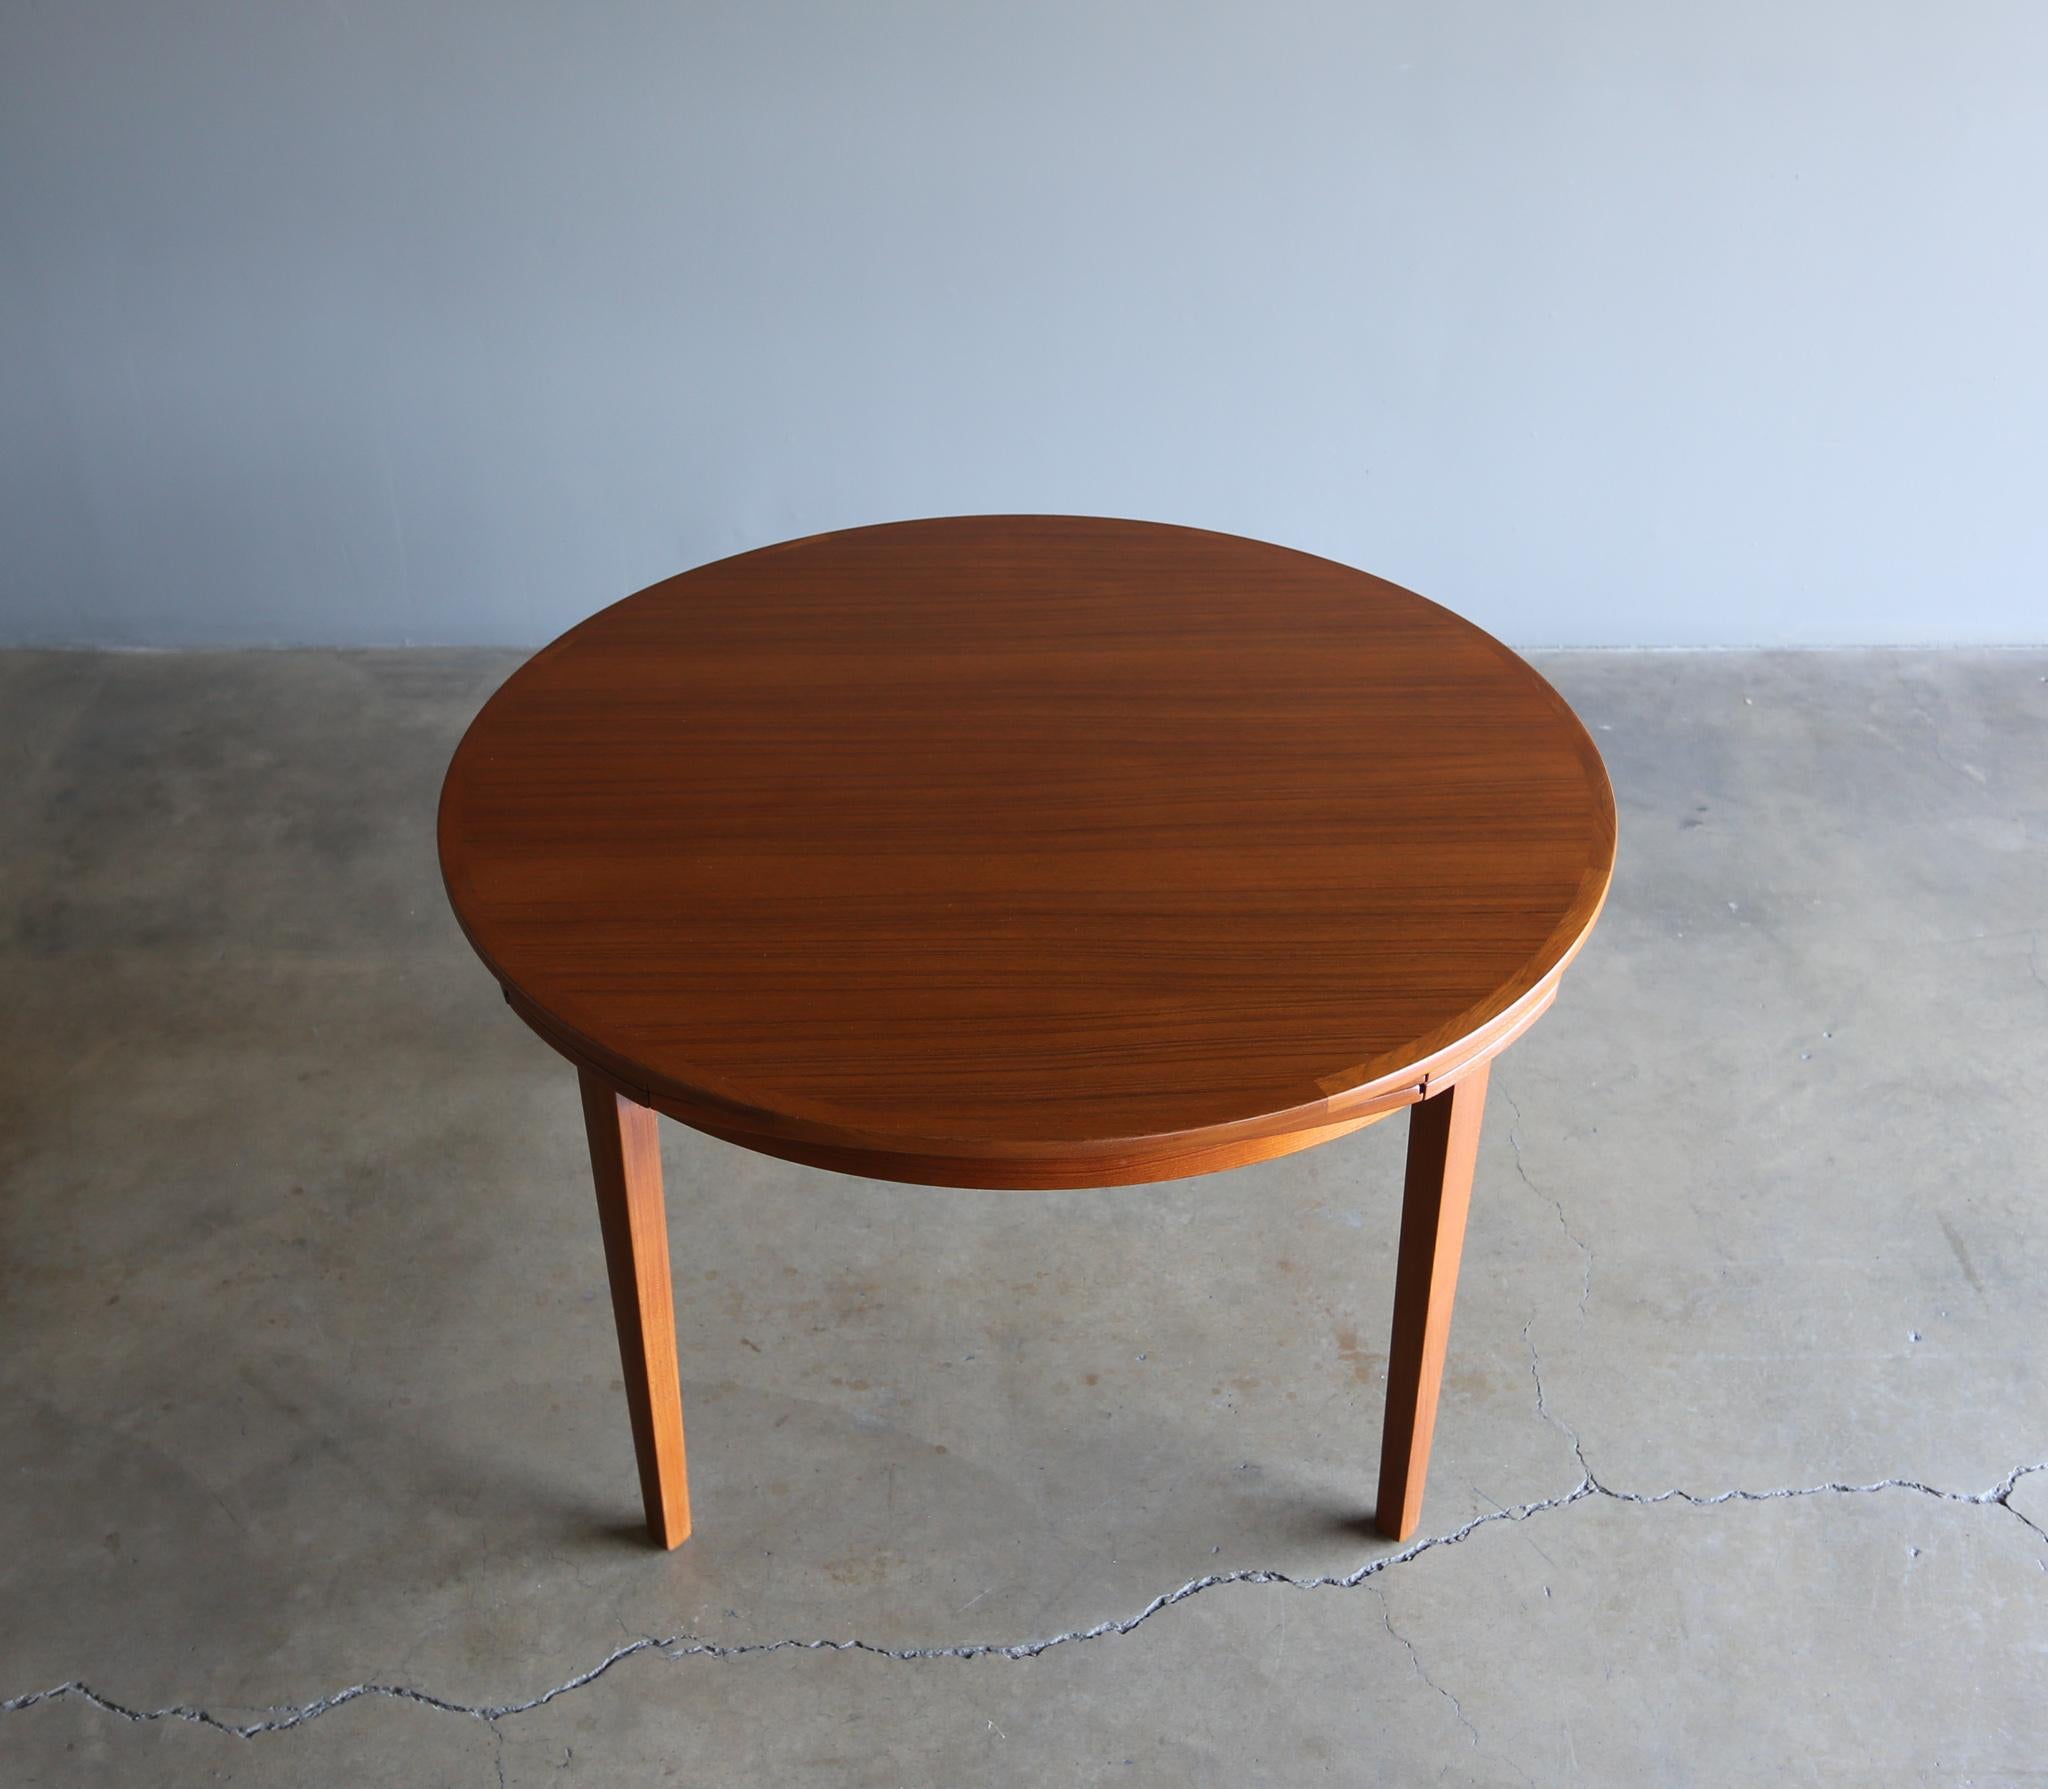 Dyrlund teak flip flap lotus dining table, circa 1965. This table expands to 68.75